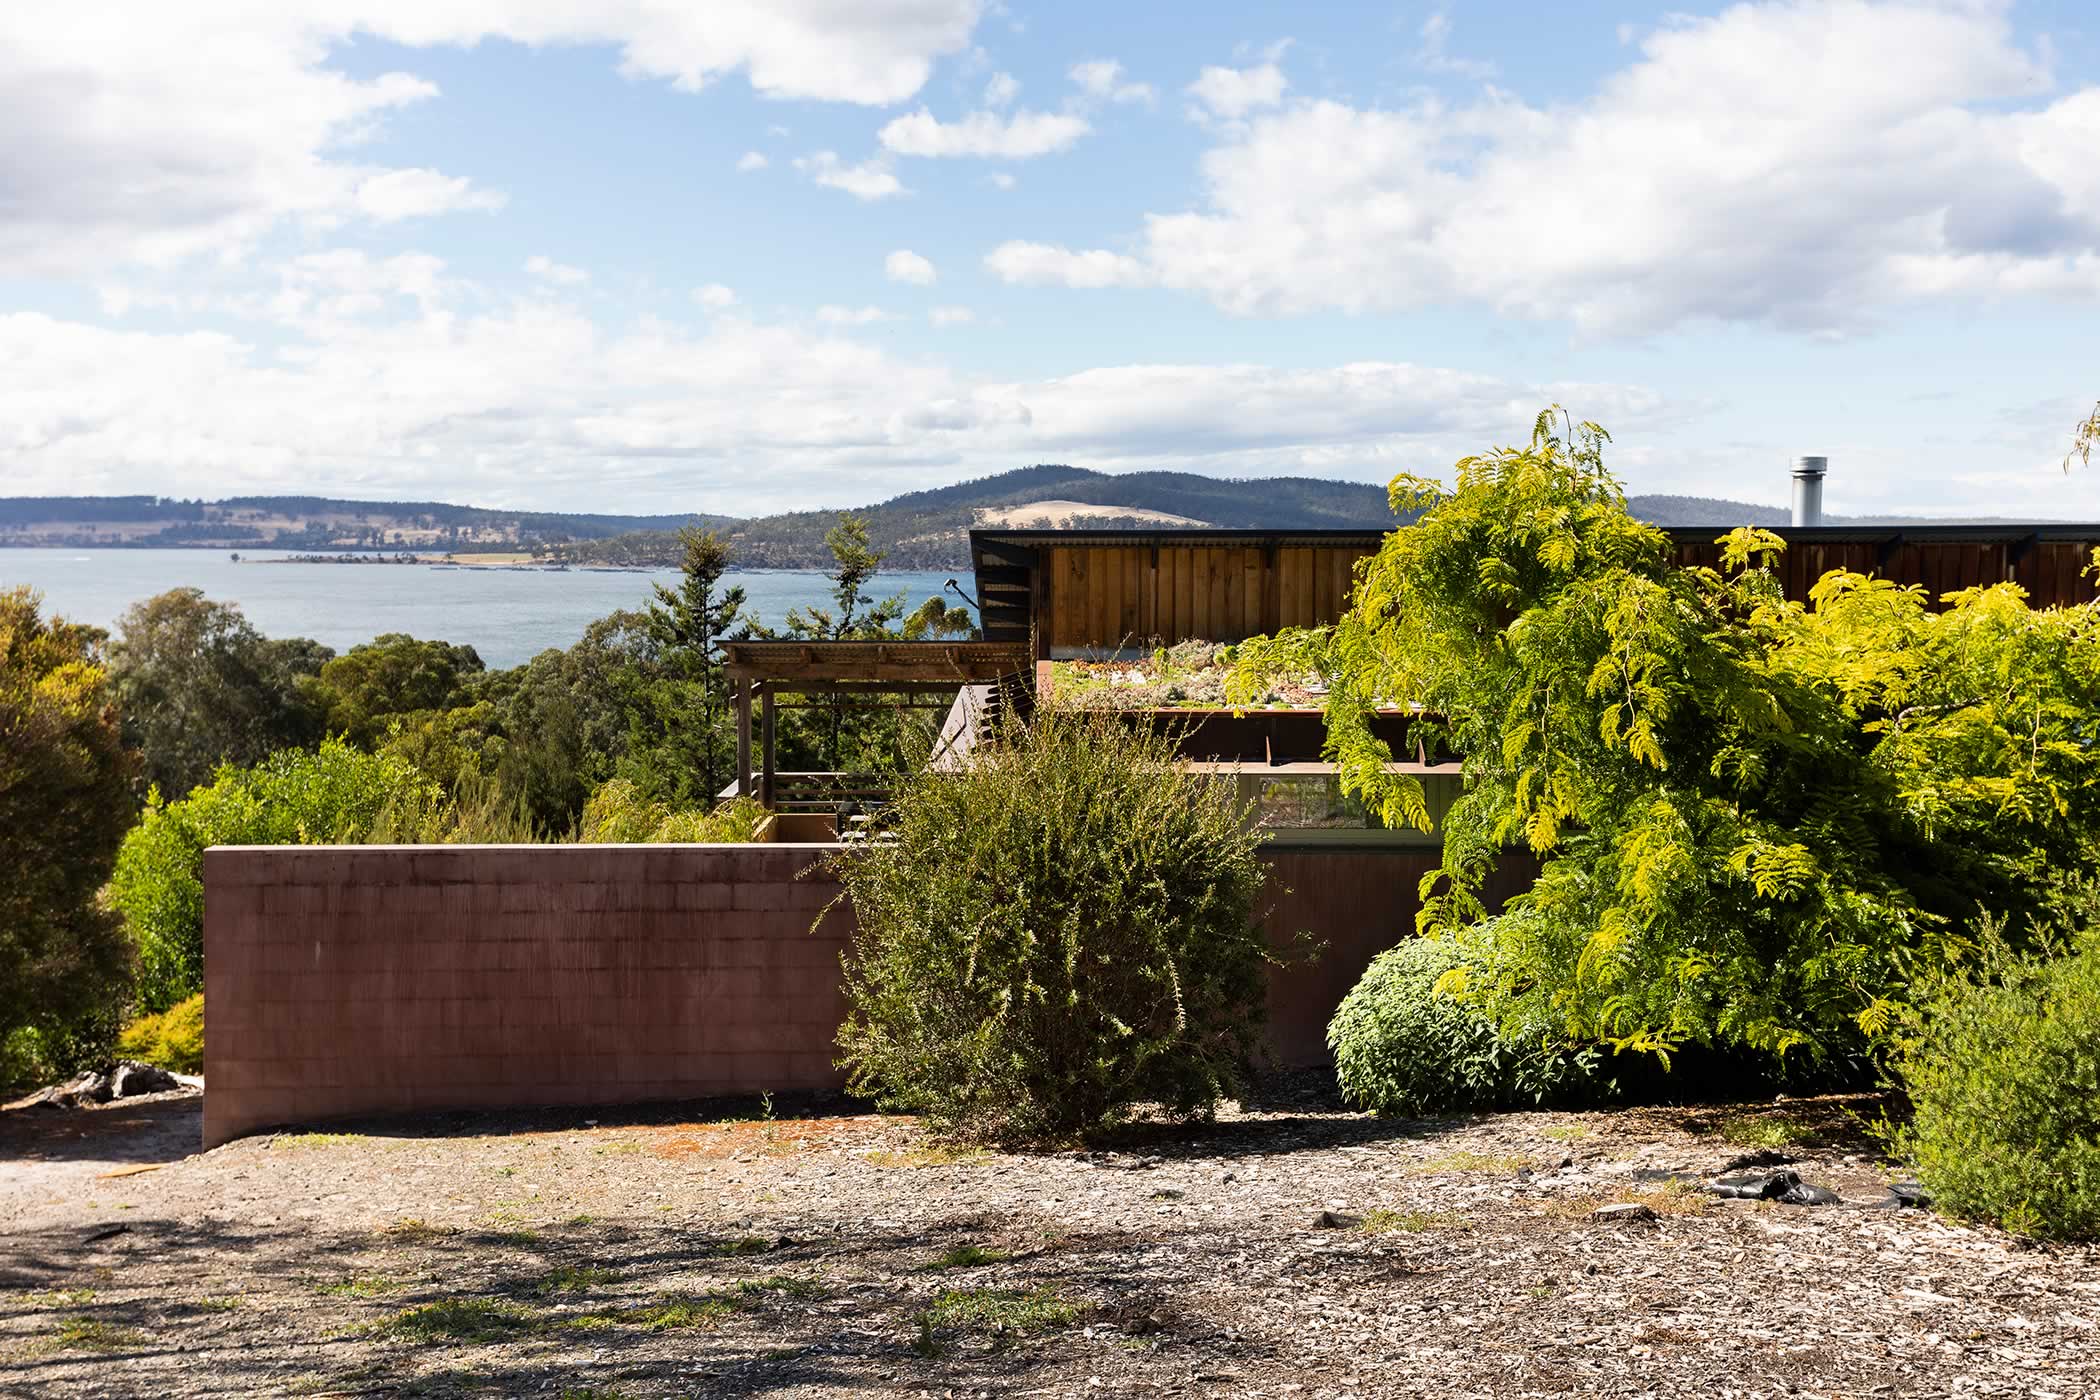 Residential extension, Kettering, Tasmania: The garden studio extension retains the original linear house design set along the contours sympathetic to the horizontal bands of water and the hills beyond. Photo by Adam Gibson.